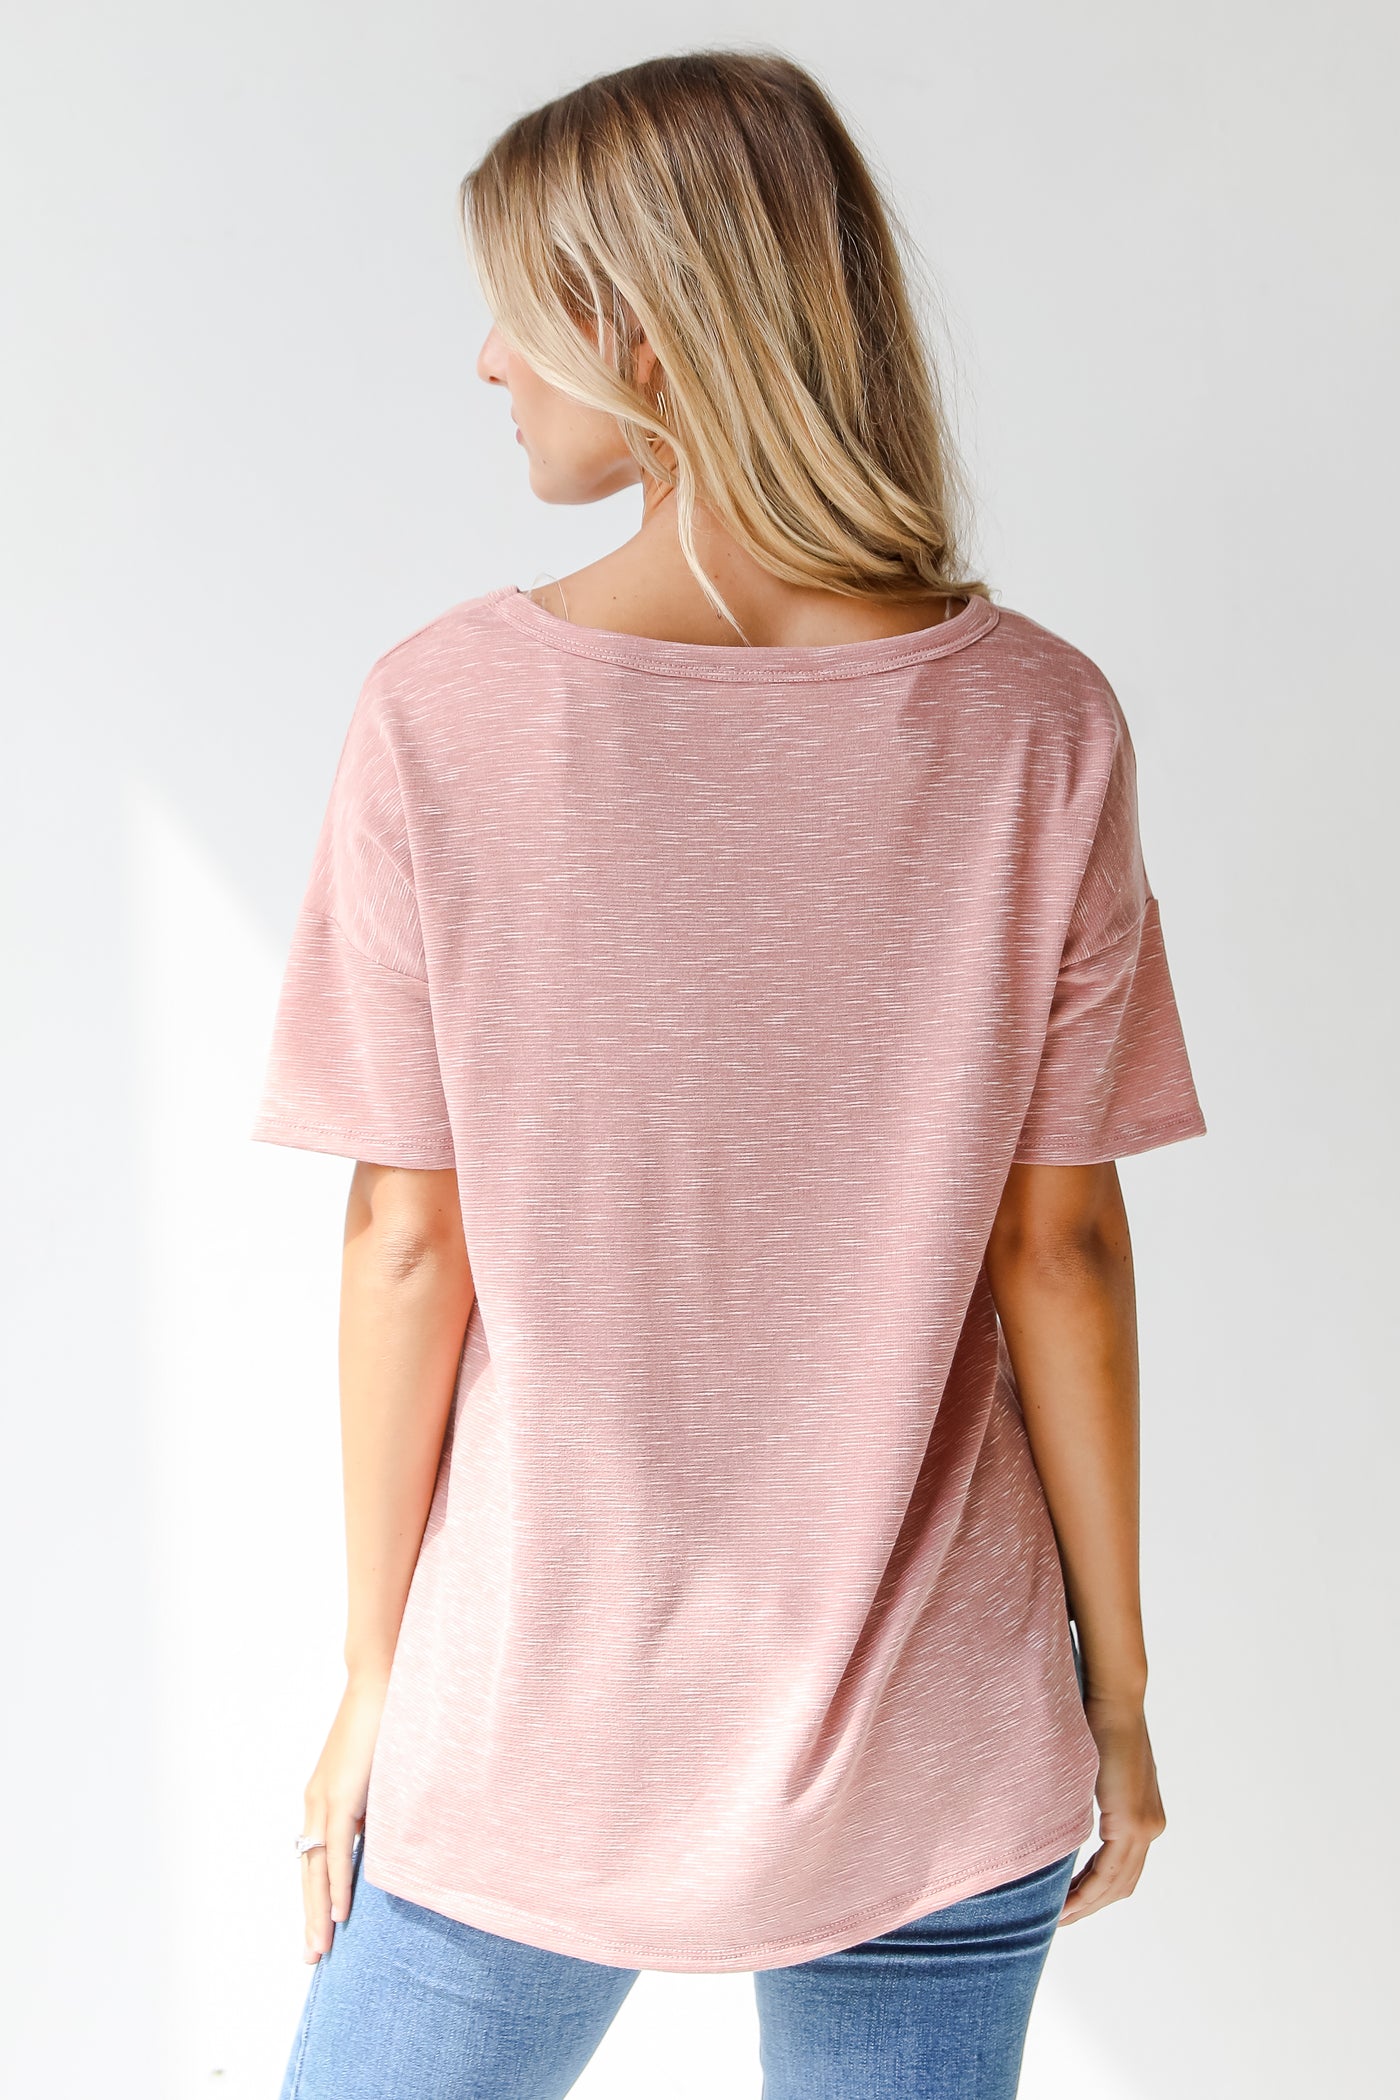 pink tee back view